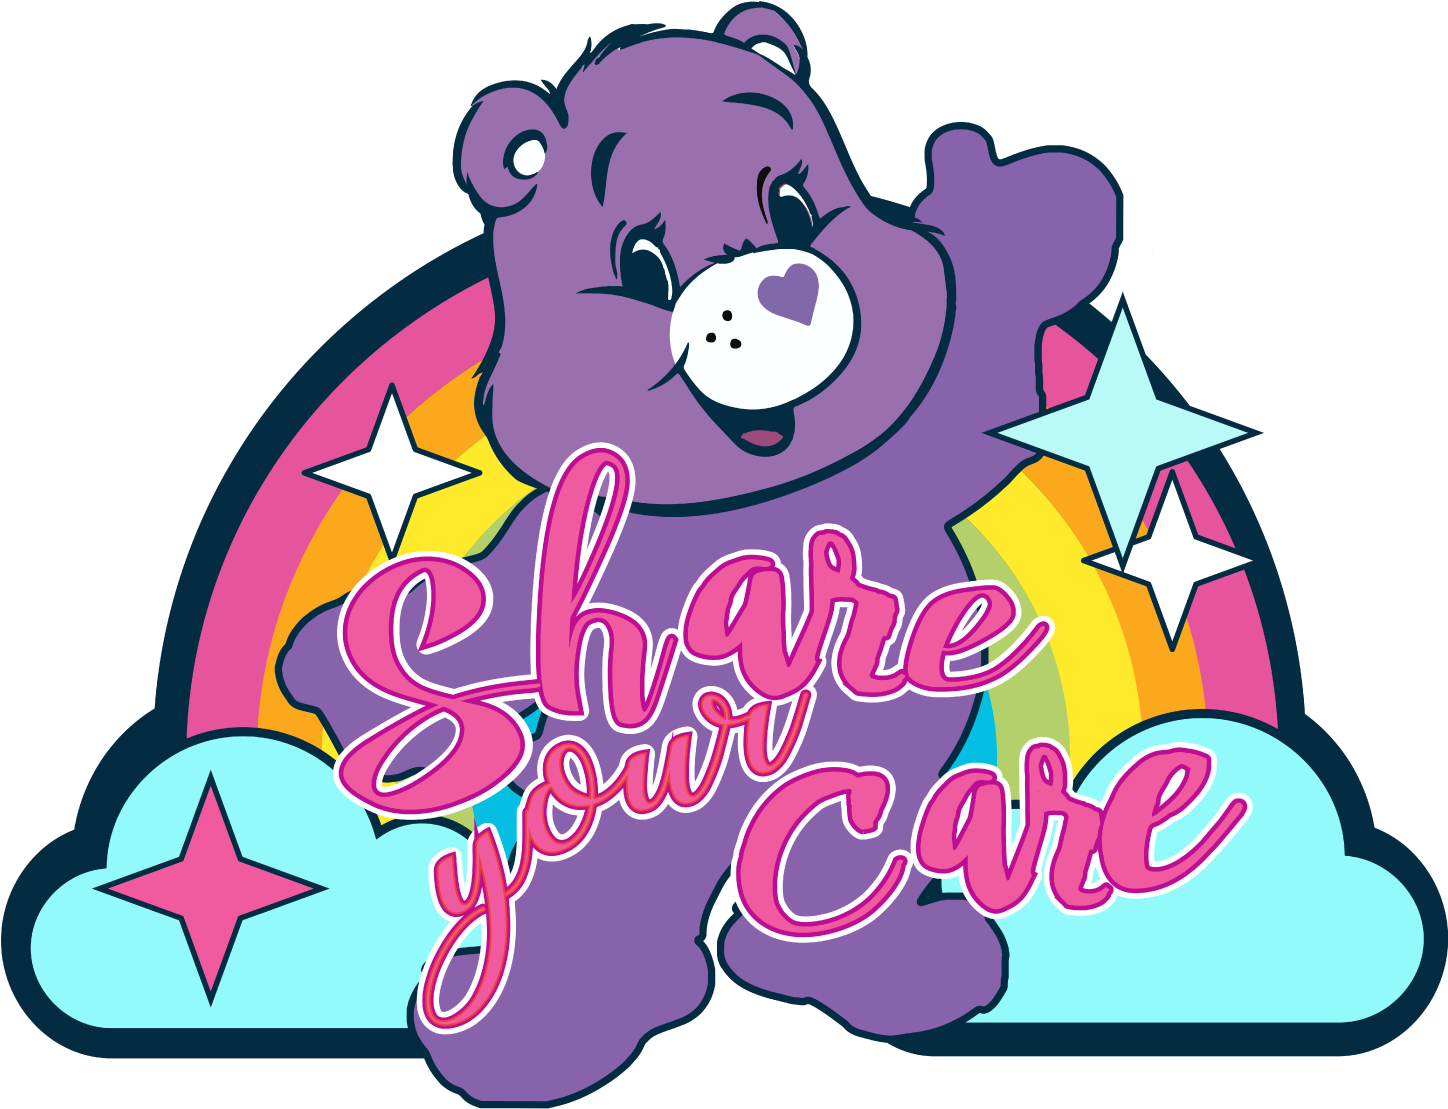 Care Bears Share Your Care Patch - Care Bears Share Your Care Patch (1500x1500)